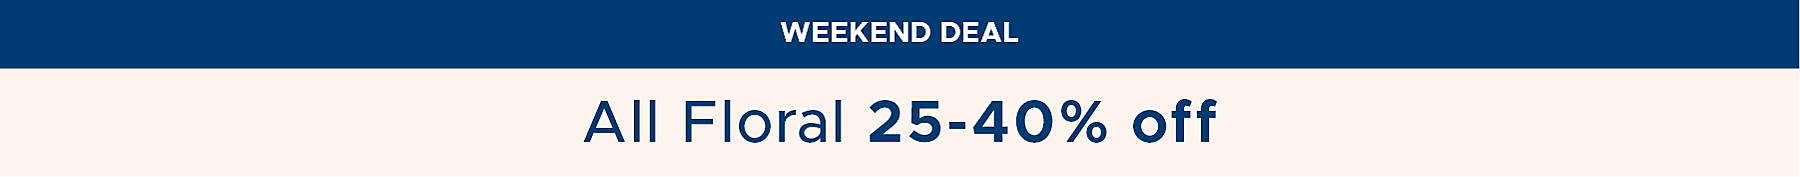 Weekend Deal All Floral 25-40% off